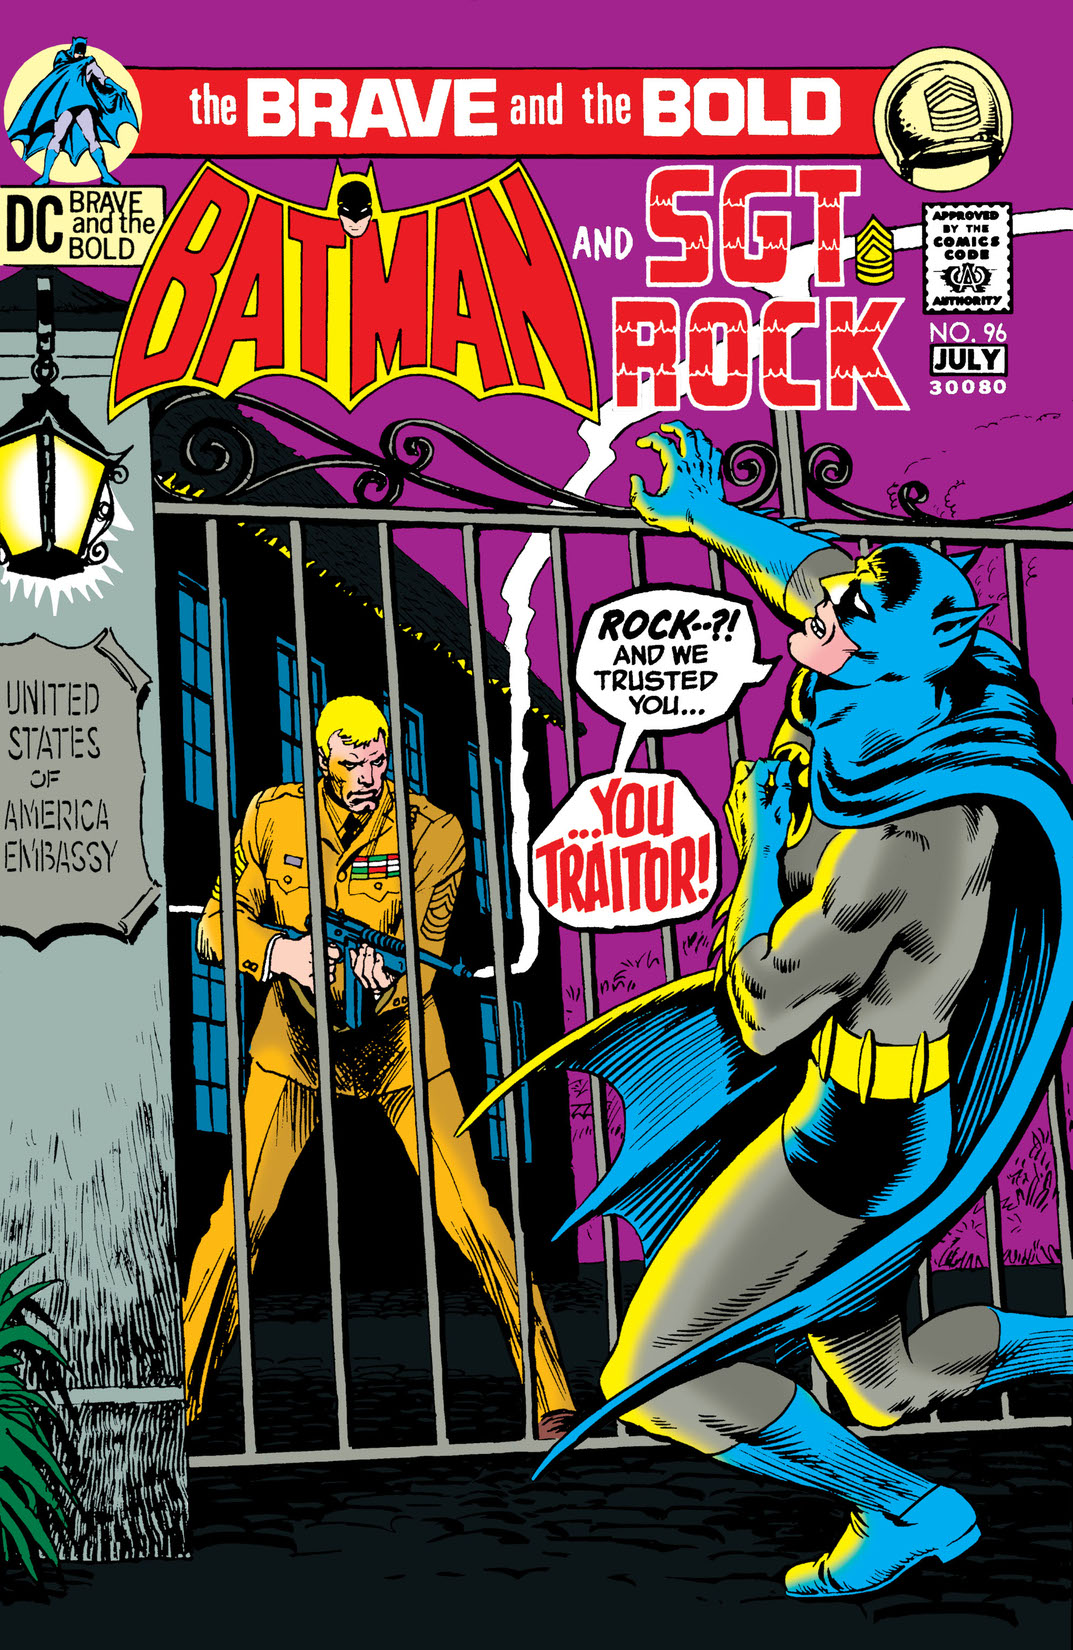 The Brave and the Bold (1955-) #96 preview images